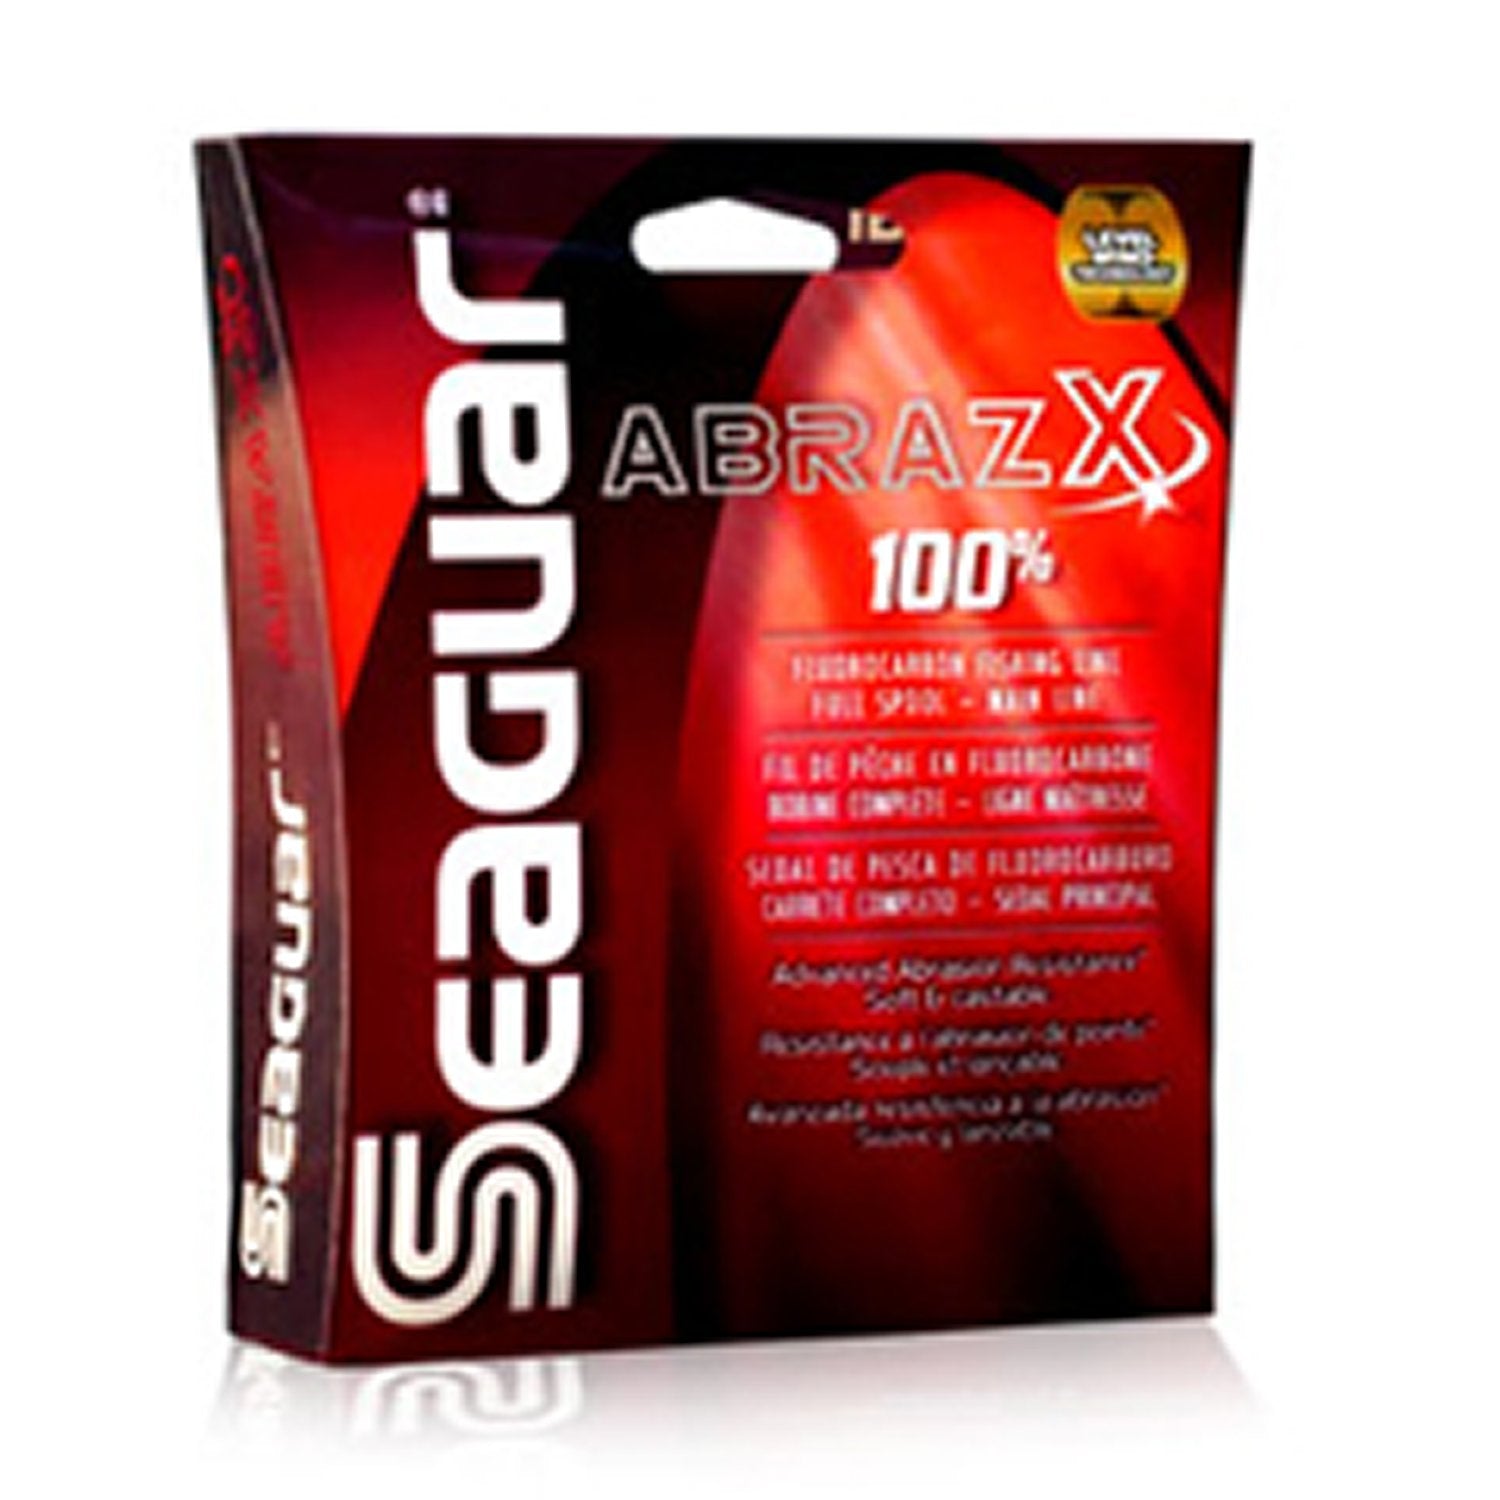 Seaguar Red Label Fishing Line 25 lb. 25 yd.  Armed Anglers guns bait  tackle lures charters fish ammo clothing